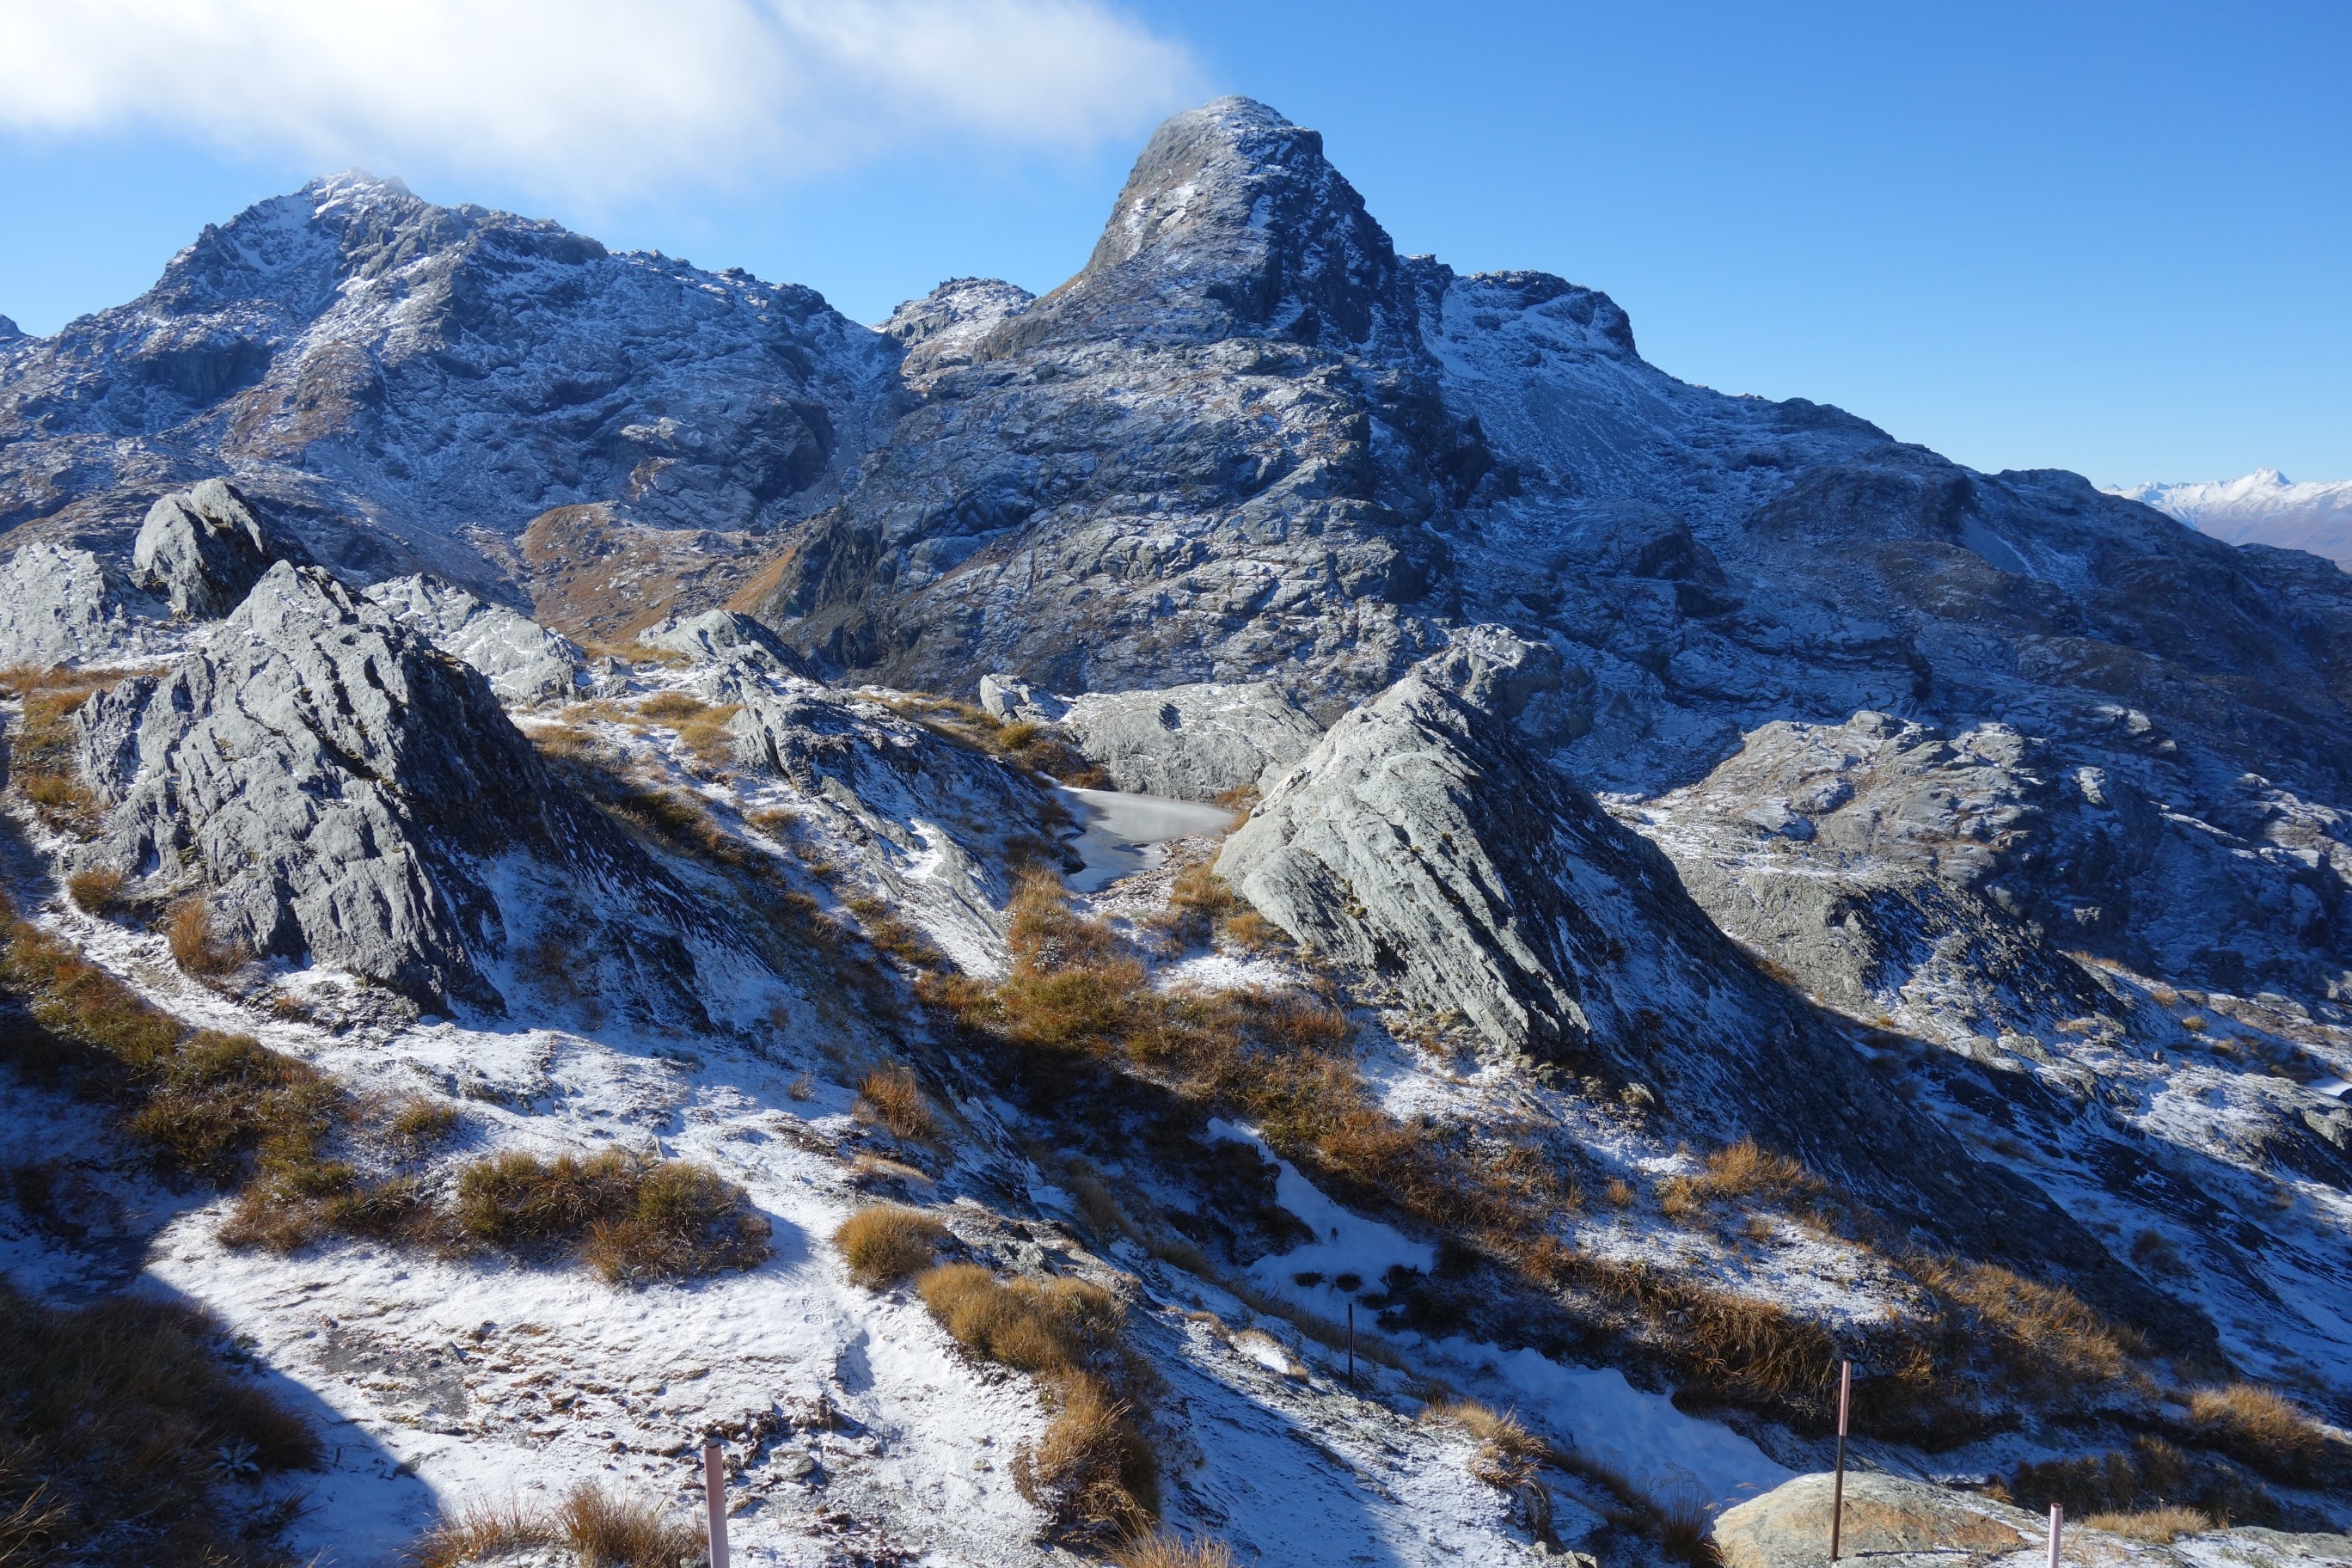 Routeburn Track Day Walk – Routeburn Shelter to Conical Hill return